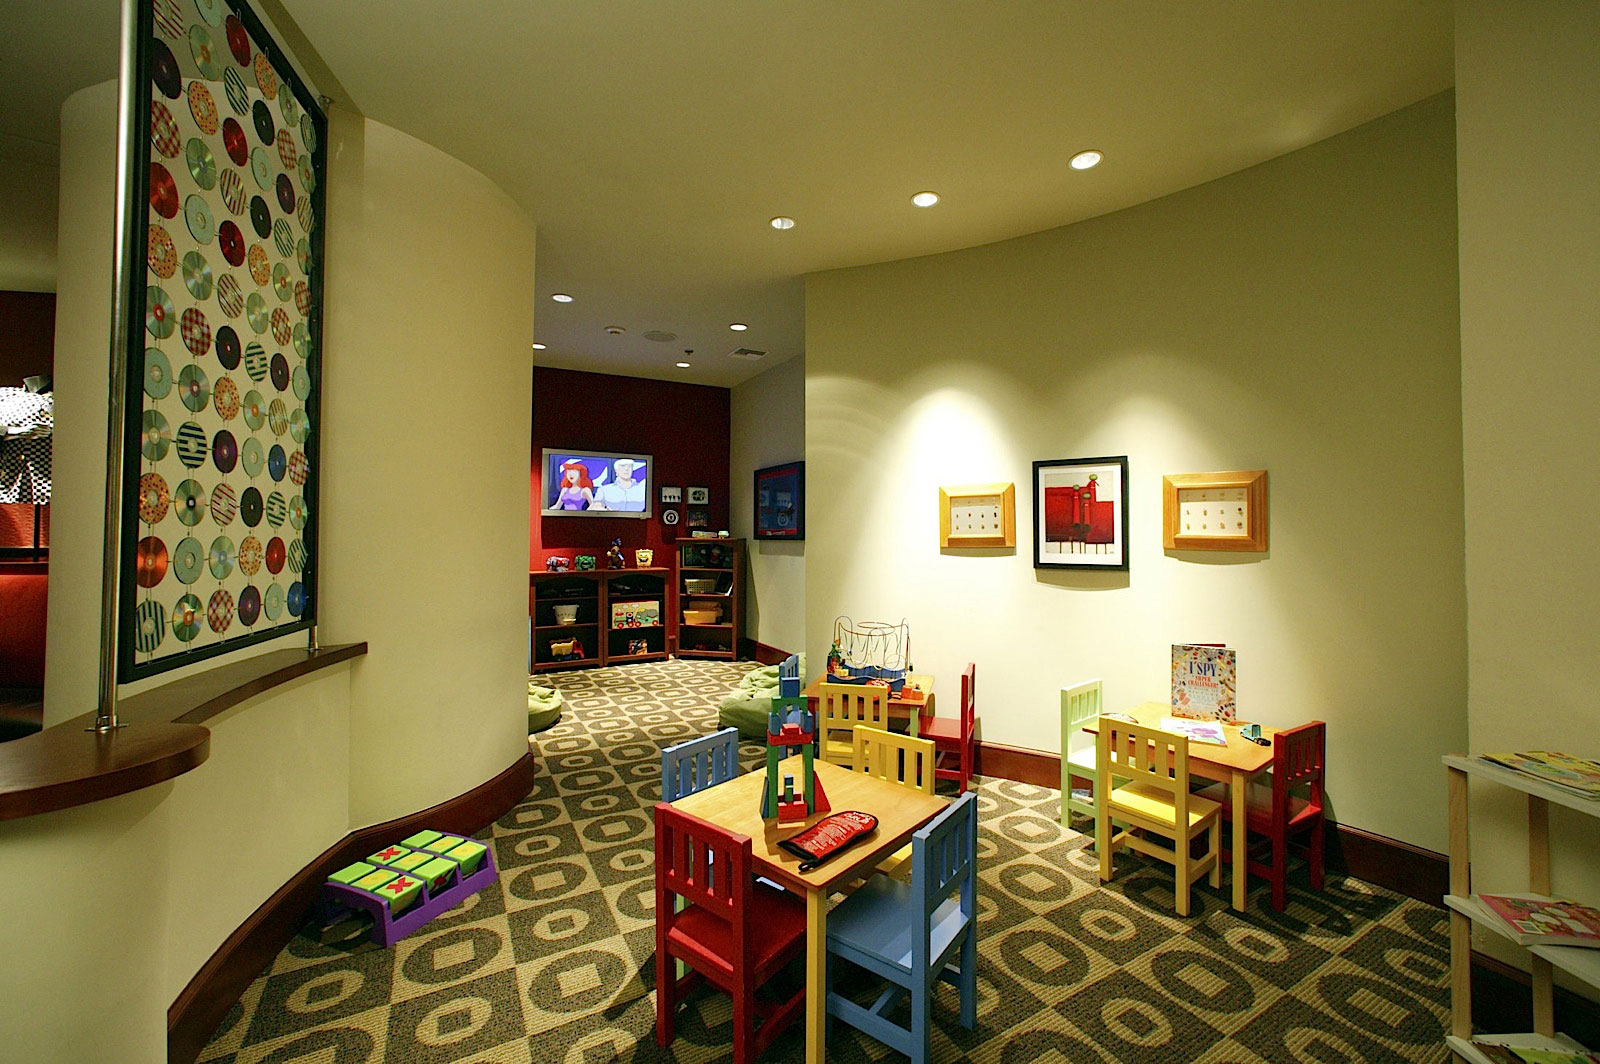 Kids Chat Tiny Interesting Kids Chat Rooms With Tiny Chairs And Table In Hodgepodge Color Furnished With Wall Decorations And Completed With Ceiling Lighting Kids Room Design And Furniture Of Kids Chat Rooms